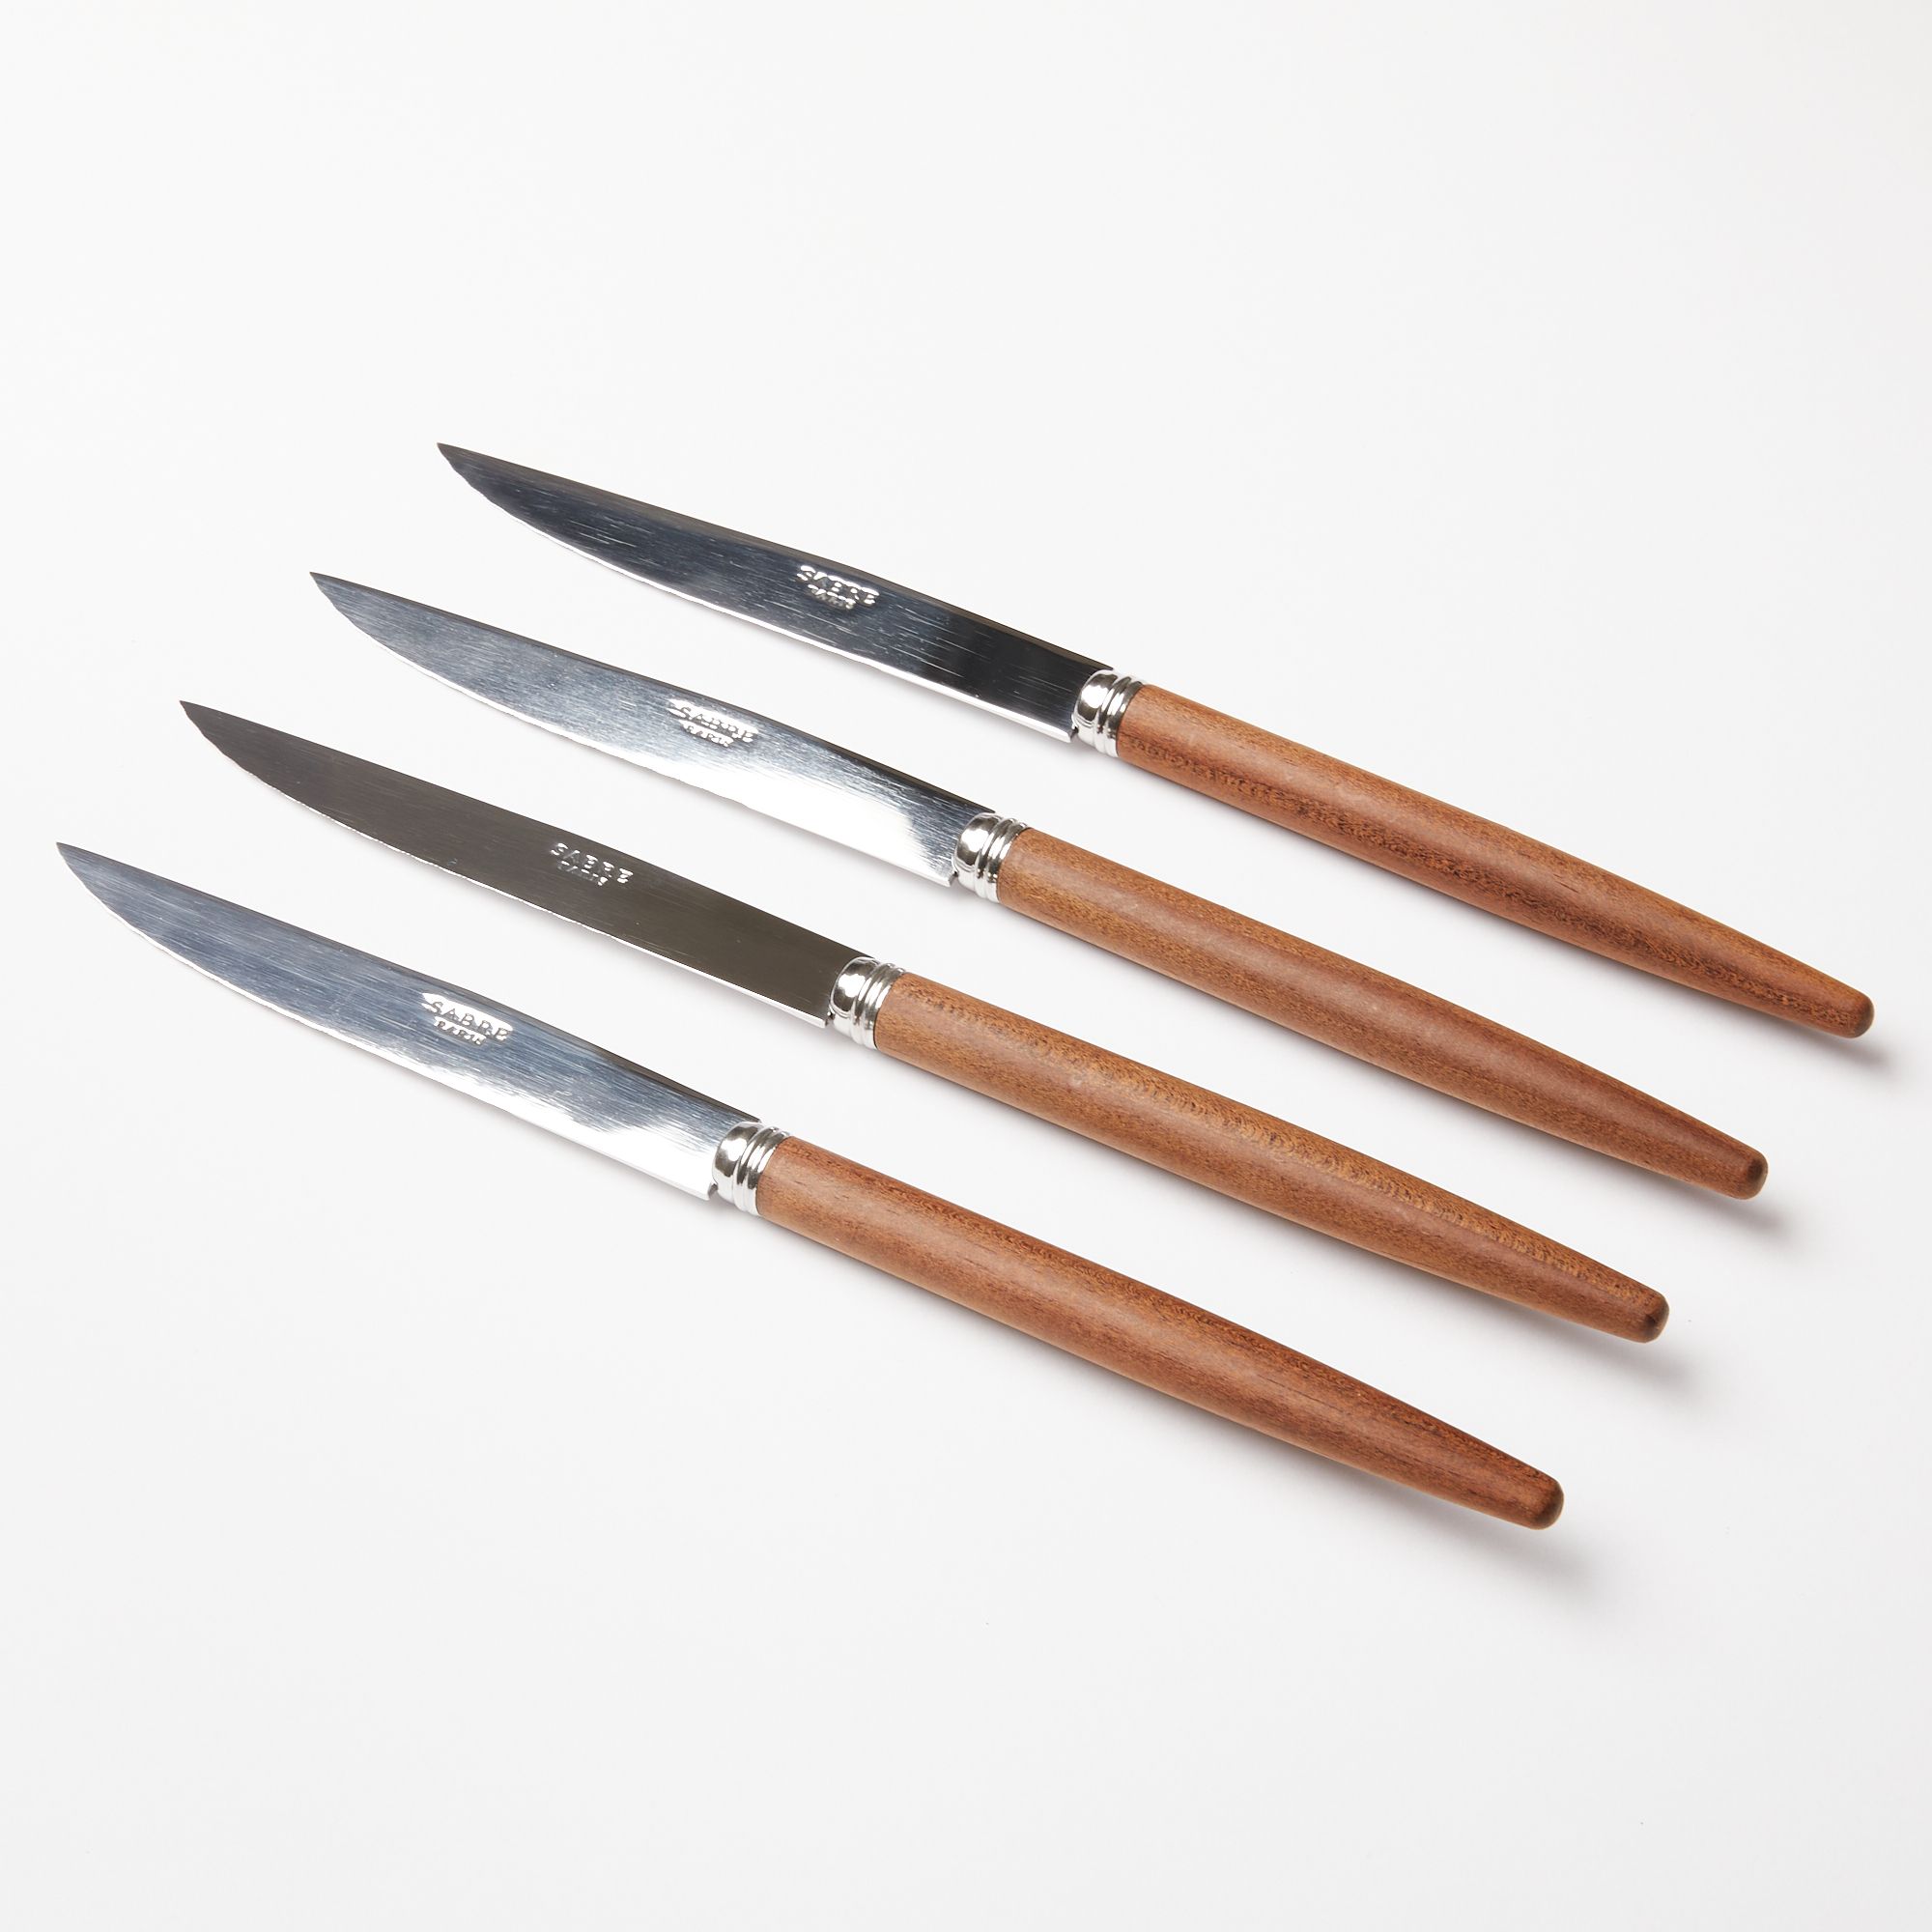 Four steak knives with steel blades and simple wood handles